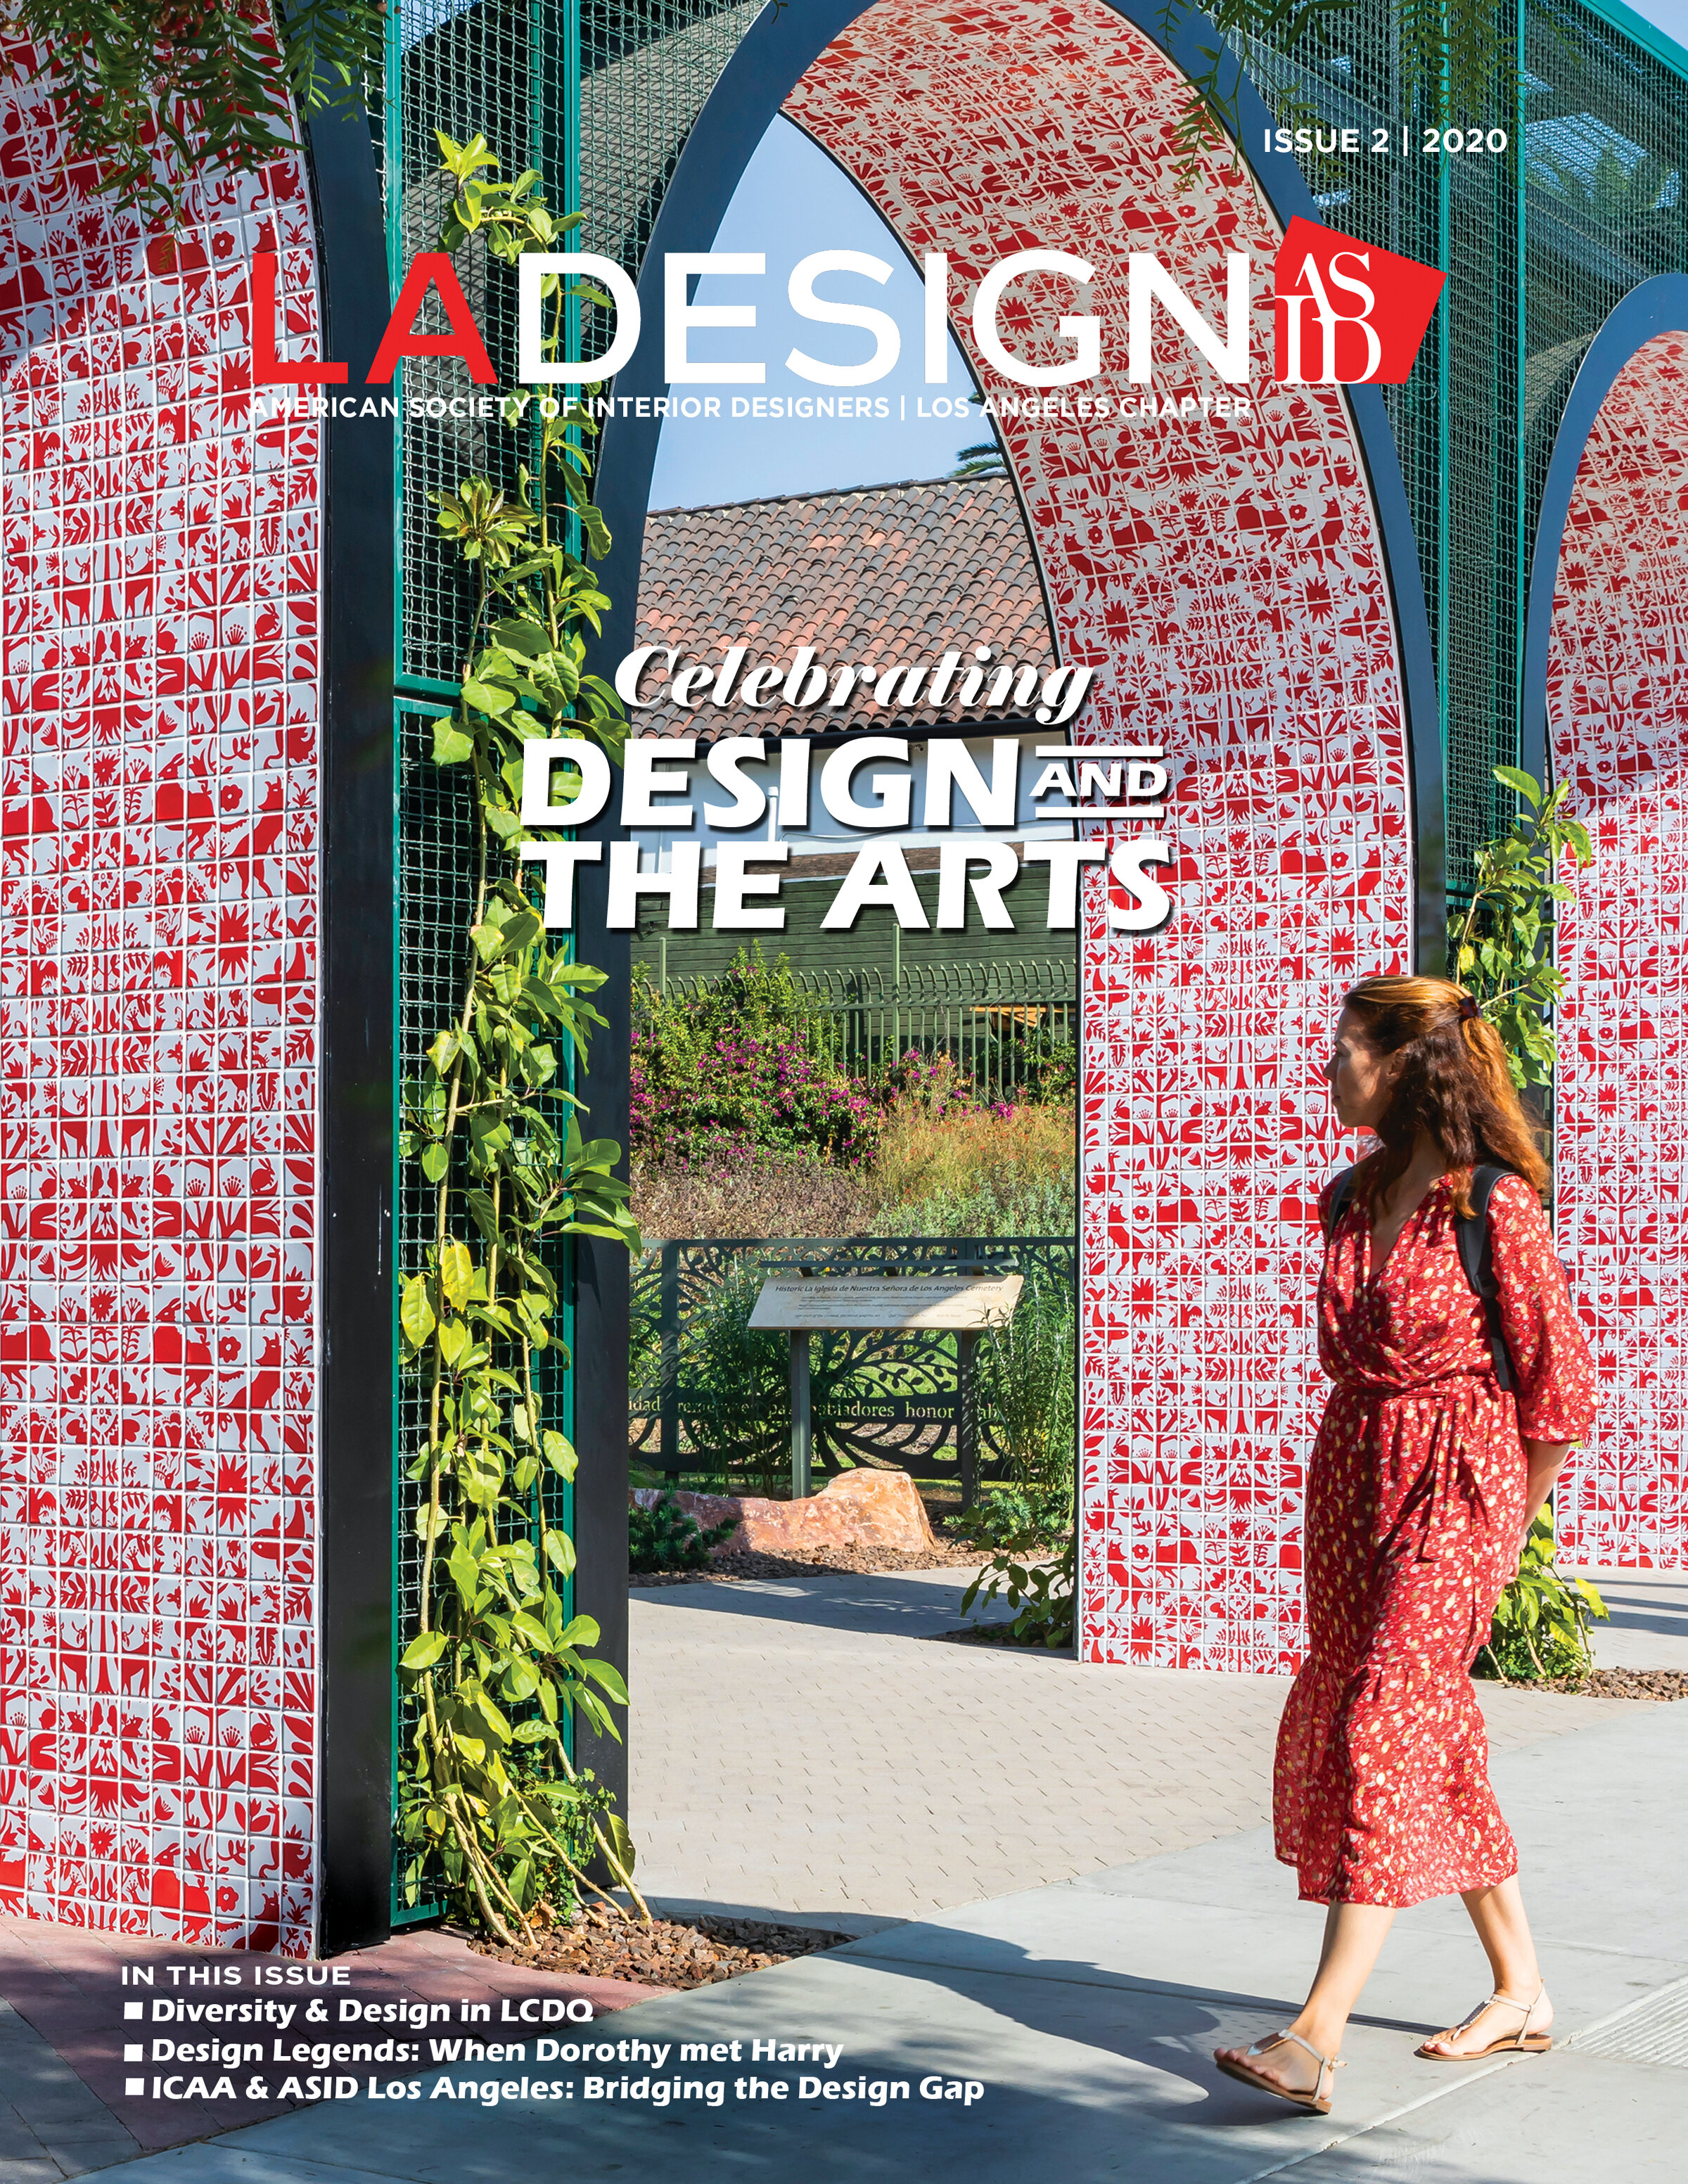 This image used with permission provided by  Gregory Firlotte @ LA Design Magazine